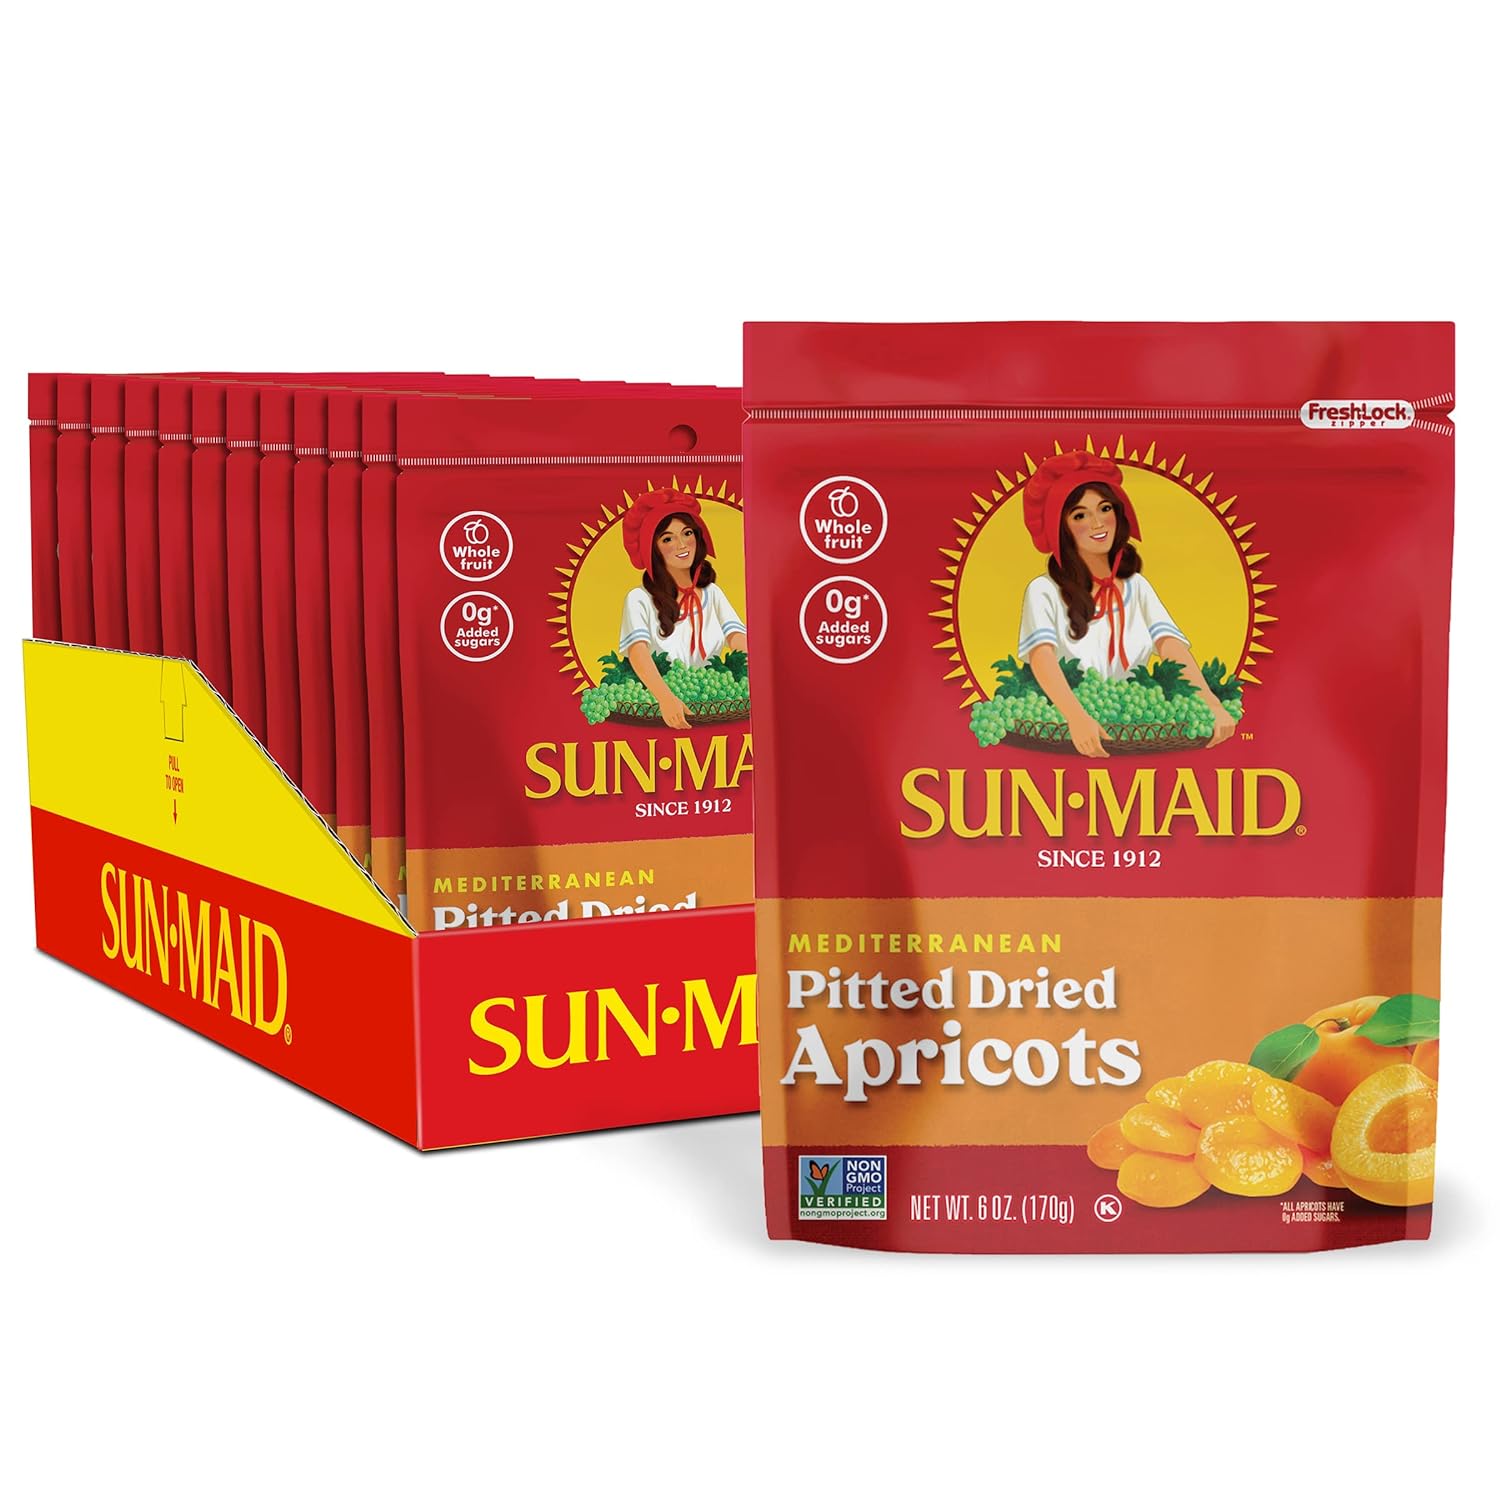 Sun-Maid Mediterranean Dried Apricots - (12 Pack) 6 oz Resealable Bag - Mediterranean Apricot Dried Fruit Snack for Lunches, Snacks, and Natural Sweeteners